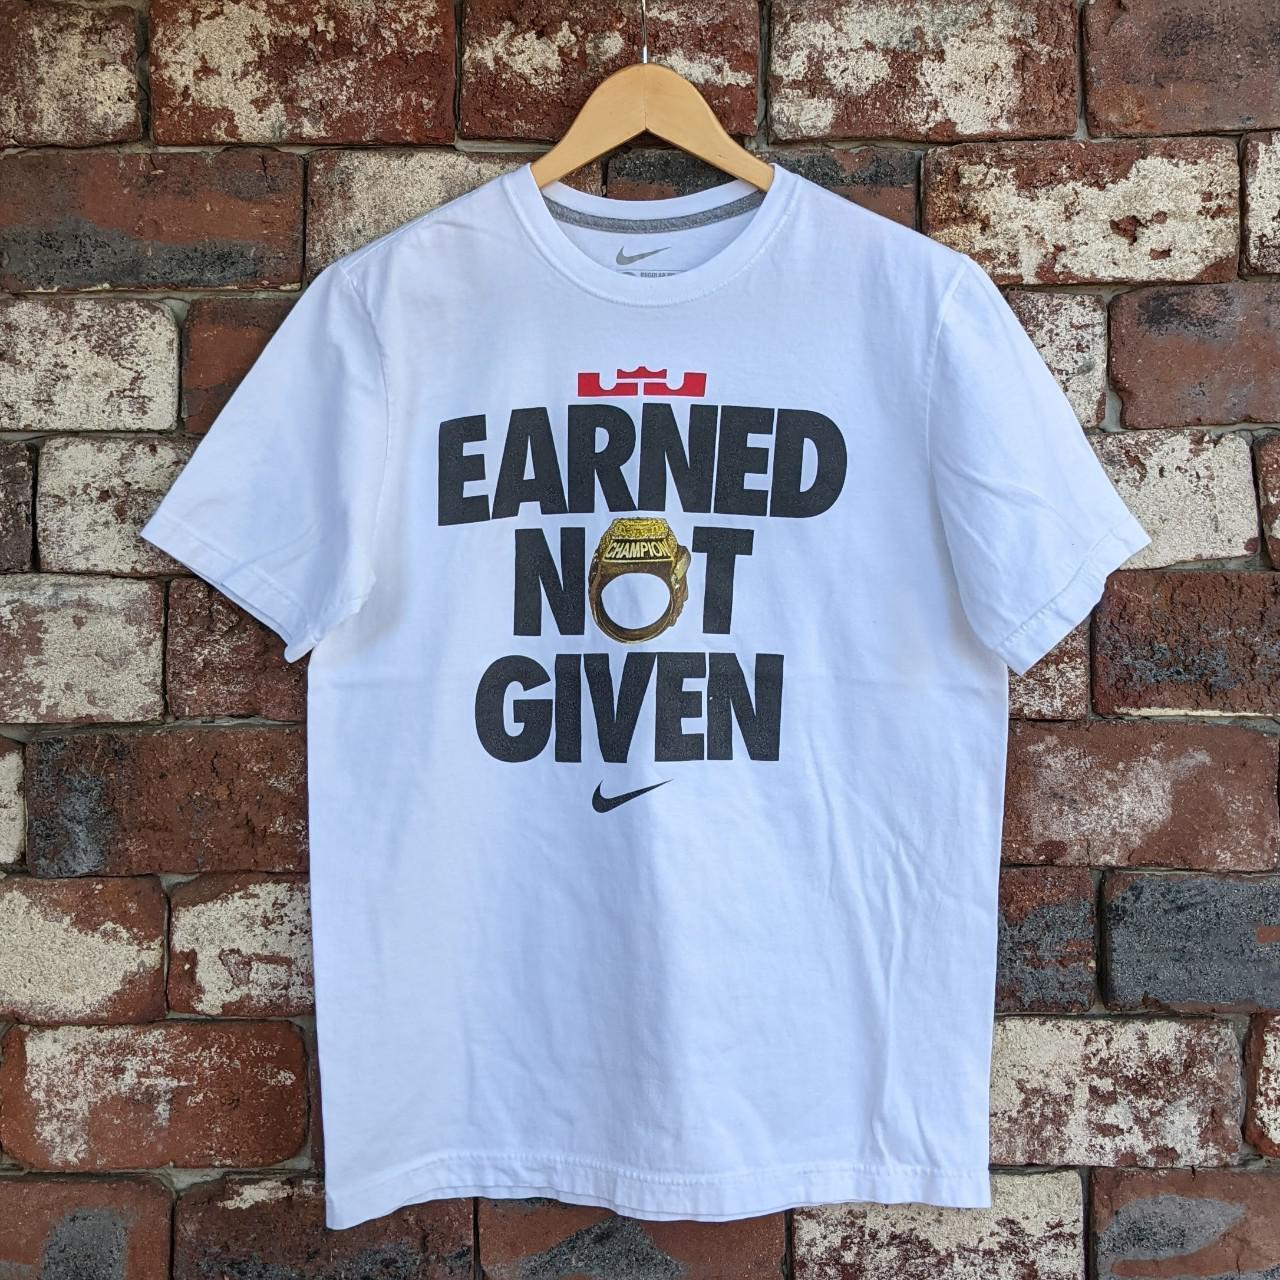 Nike to Release LeBron James' EARNED NOT GIVEN T-Shirt